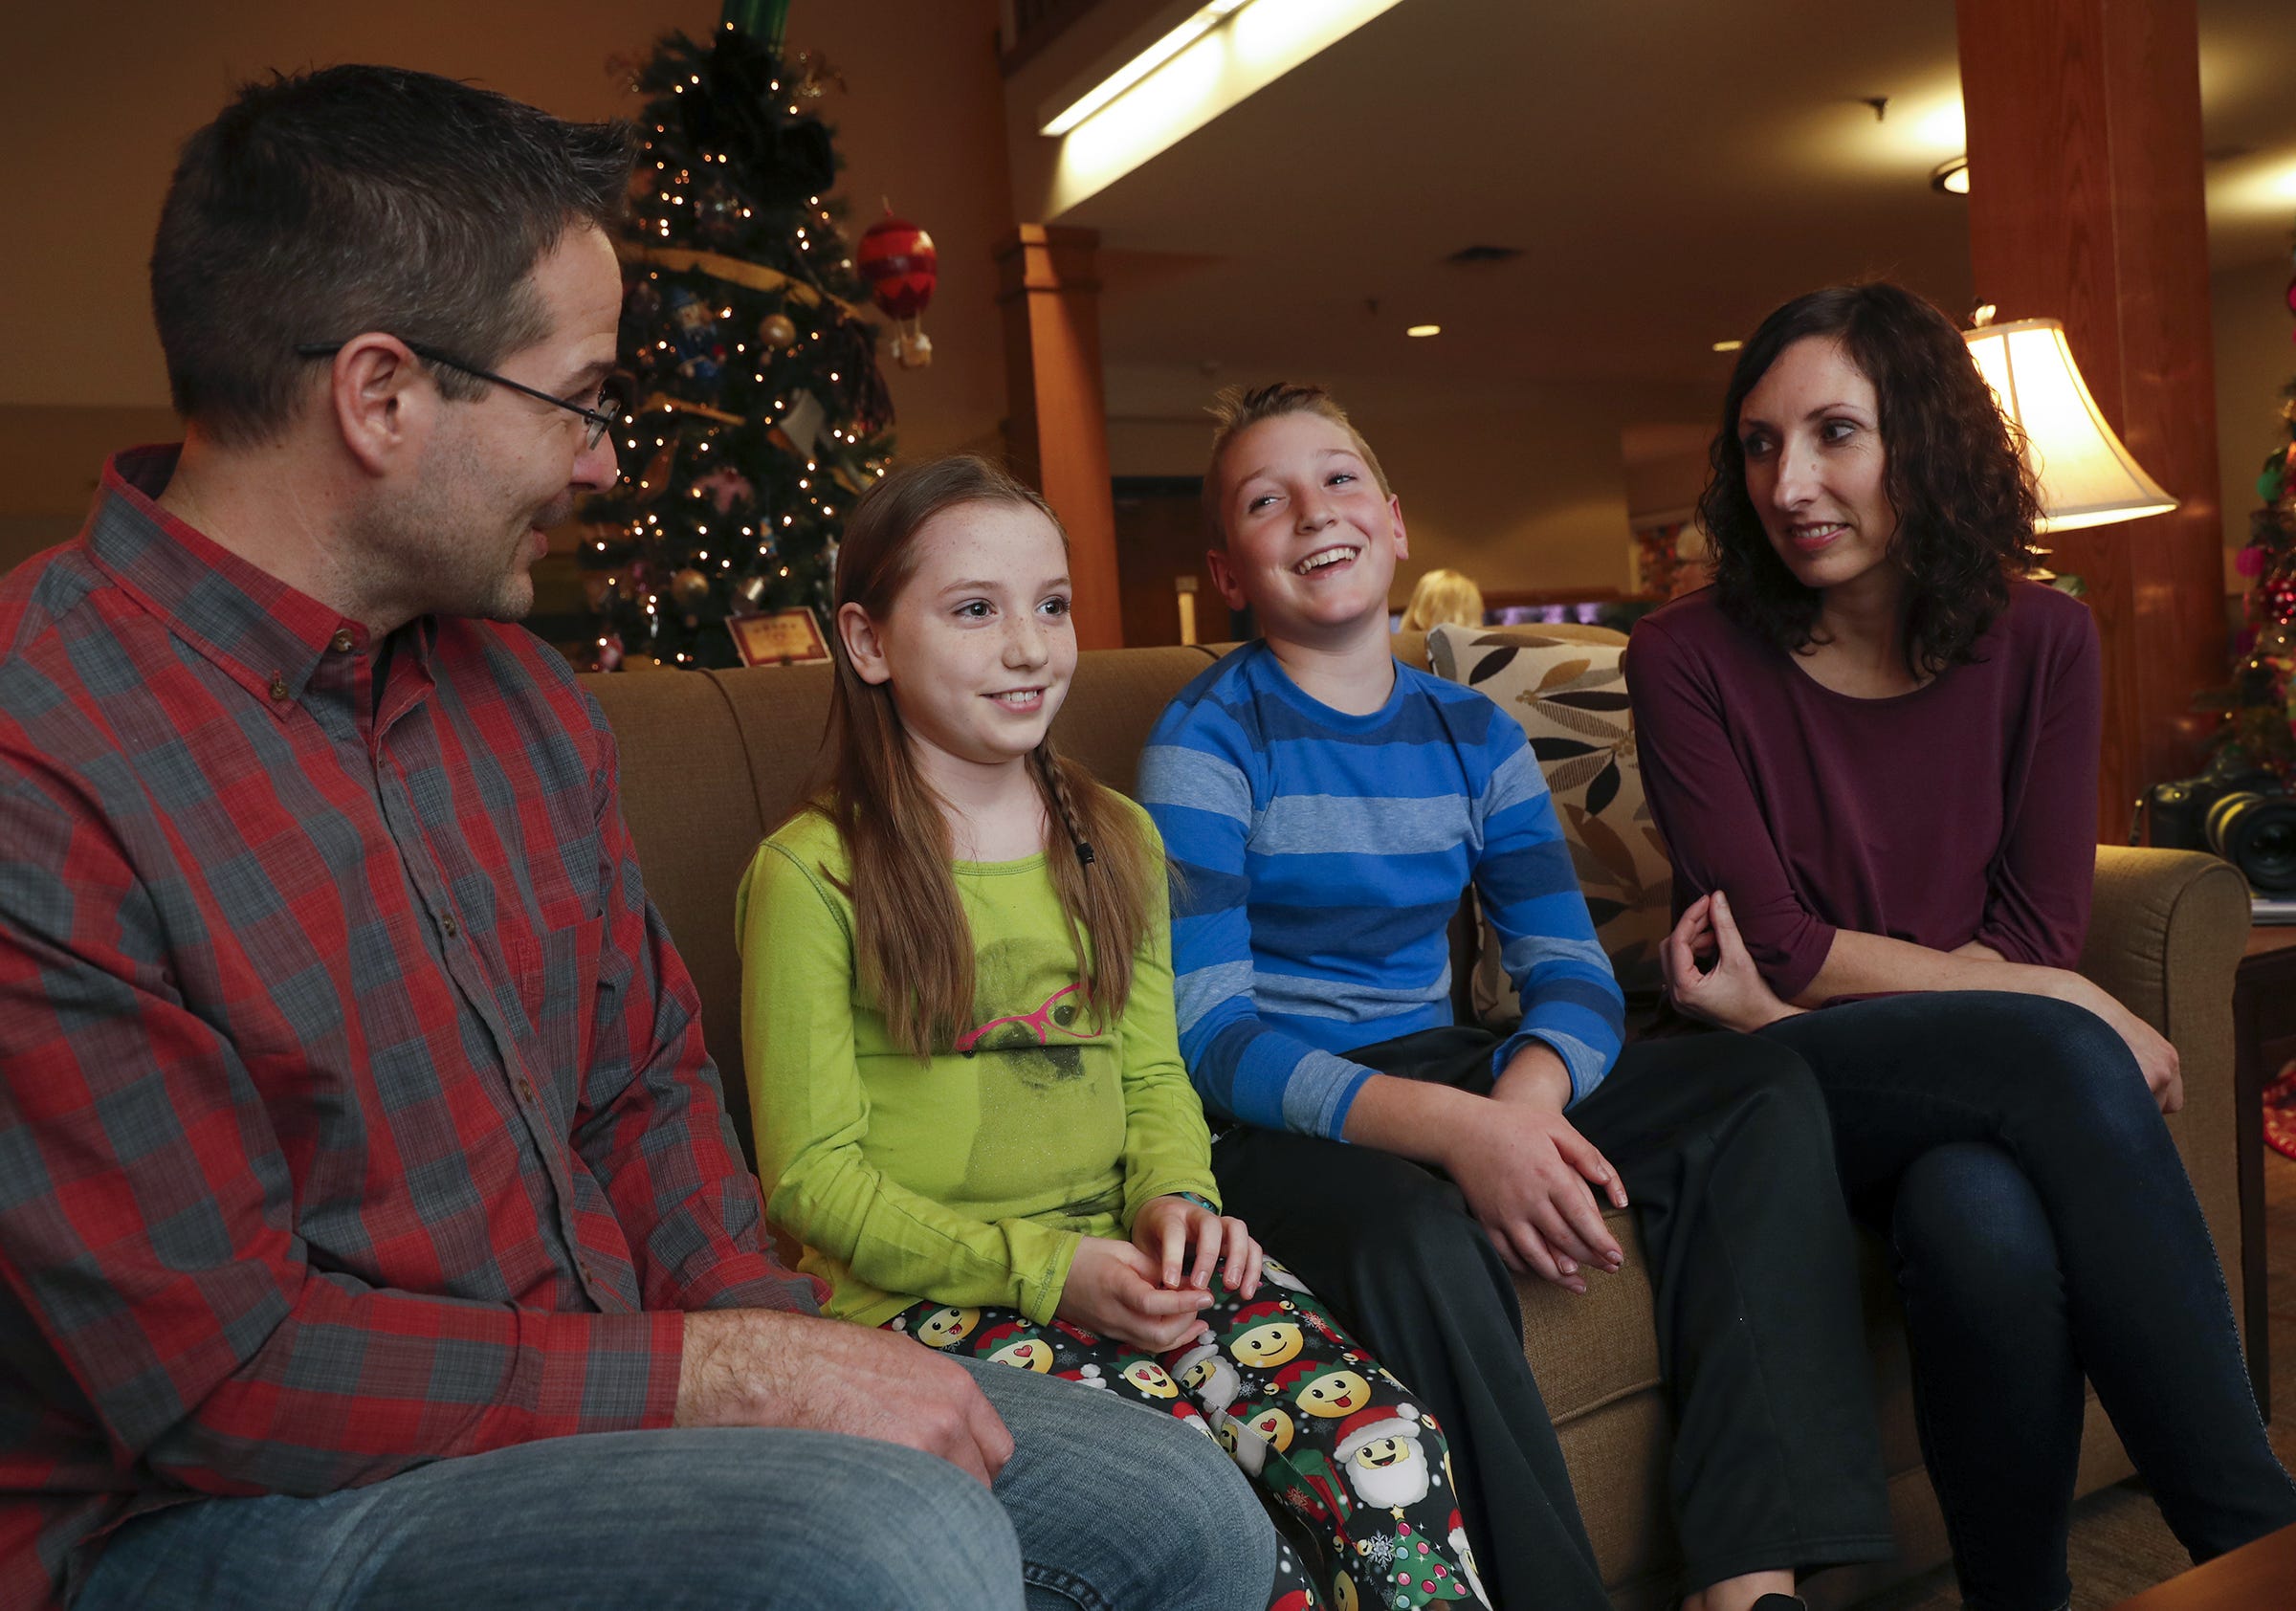 &apos;It brings peace&apos;: Ronald McDonald House gives Riley families a home during the holidays